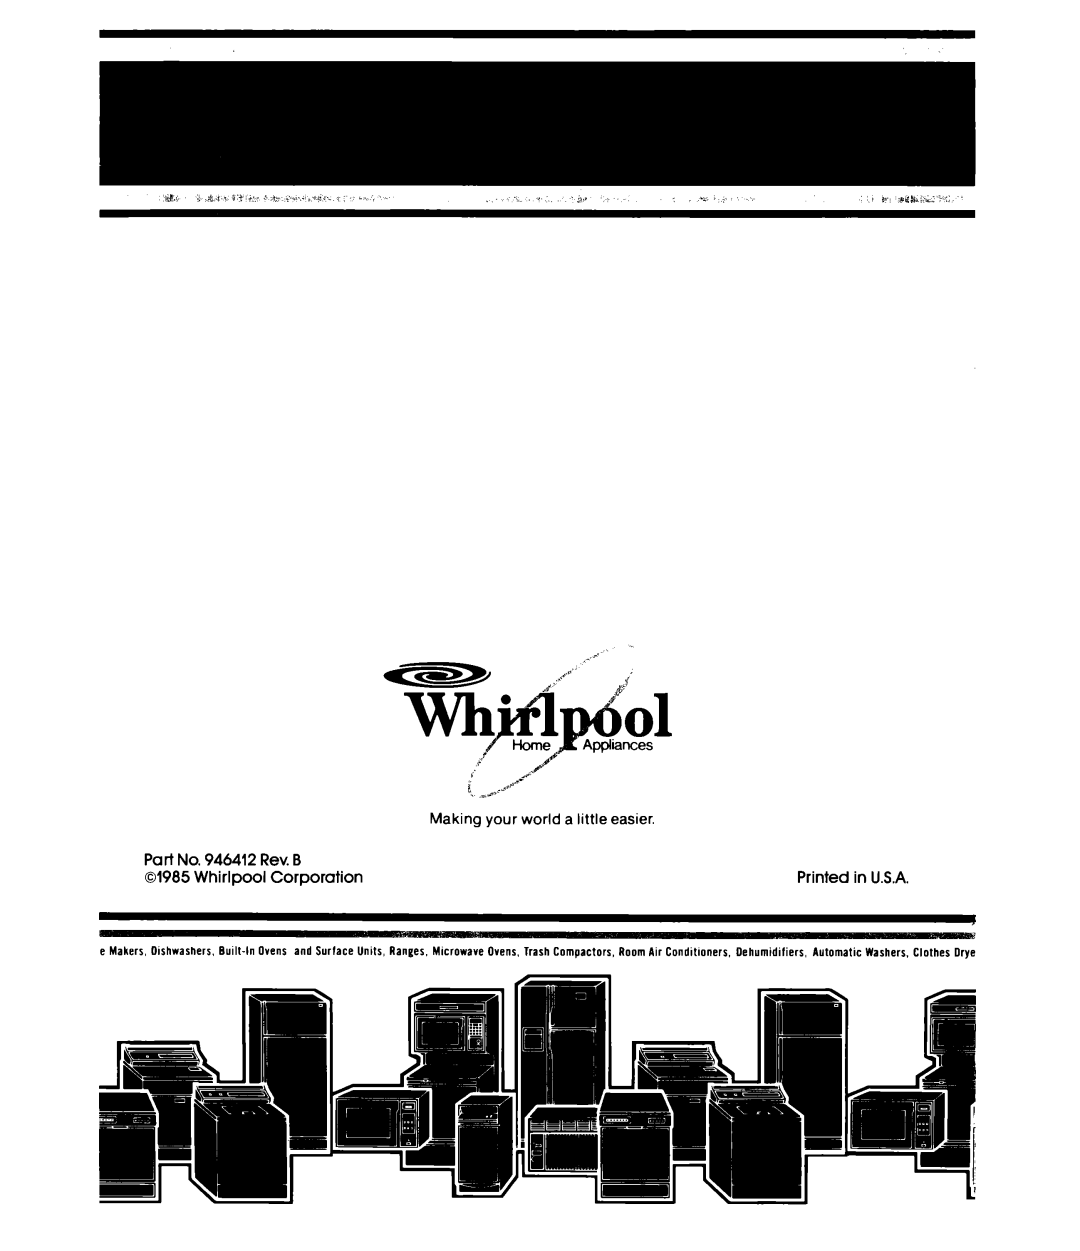 Whirlpool ETl6XK manual rices, Making your world a little easier, Part No. 946412 Rev. B, Printed in U.S.A, Whirlpool 